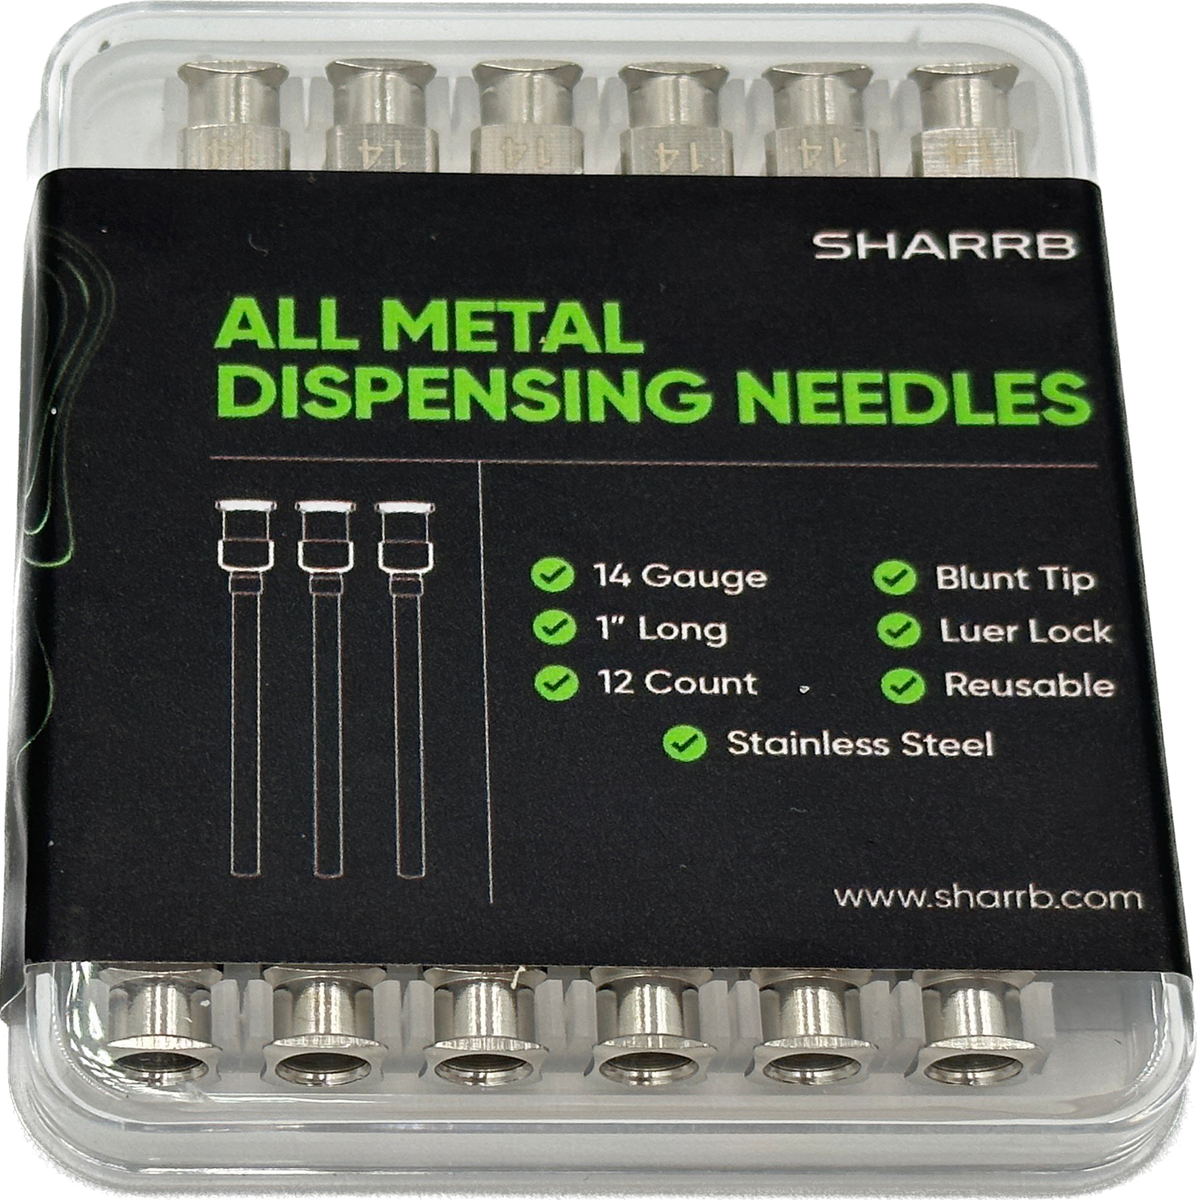 SHARRB 12 Pack - Dispensing Needle 1 - All Metal, Stainless Steel